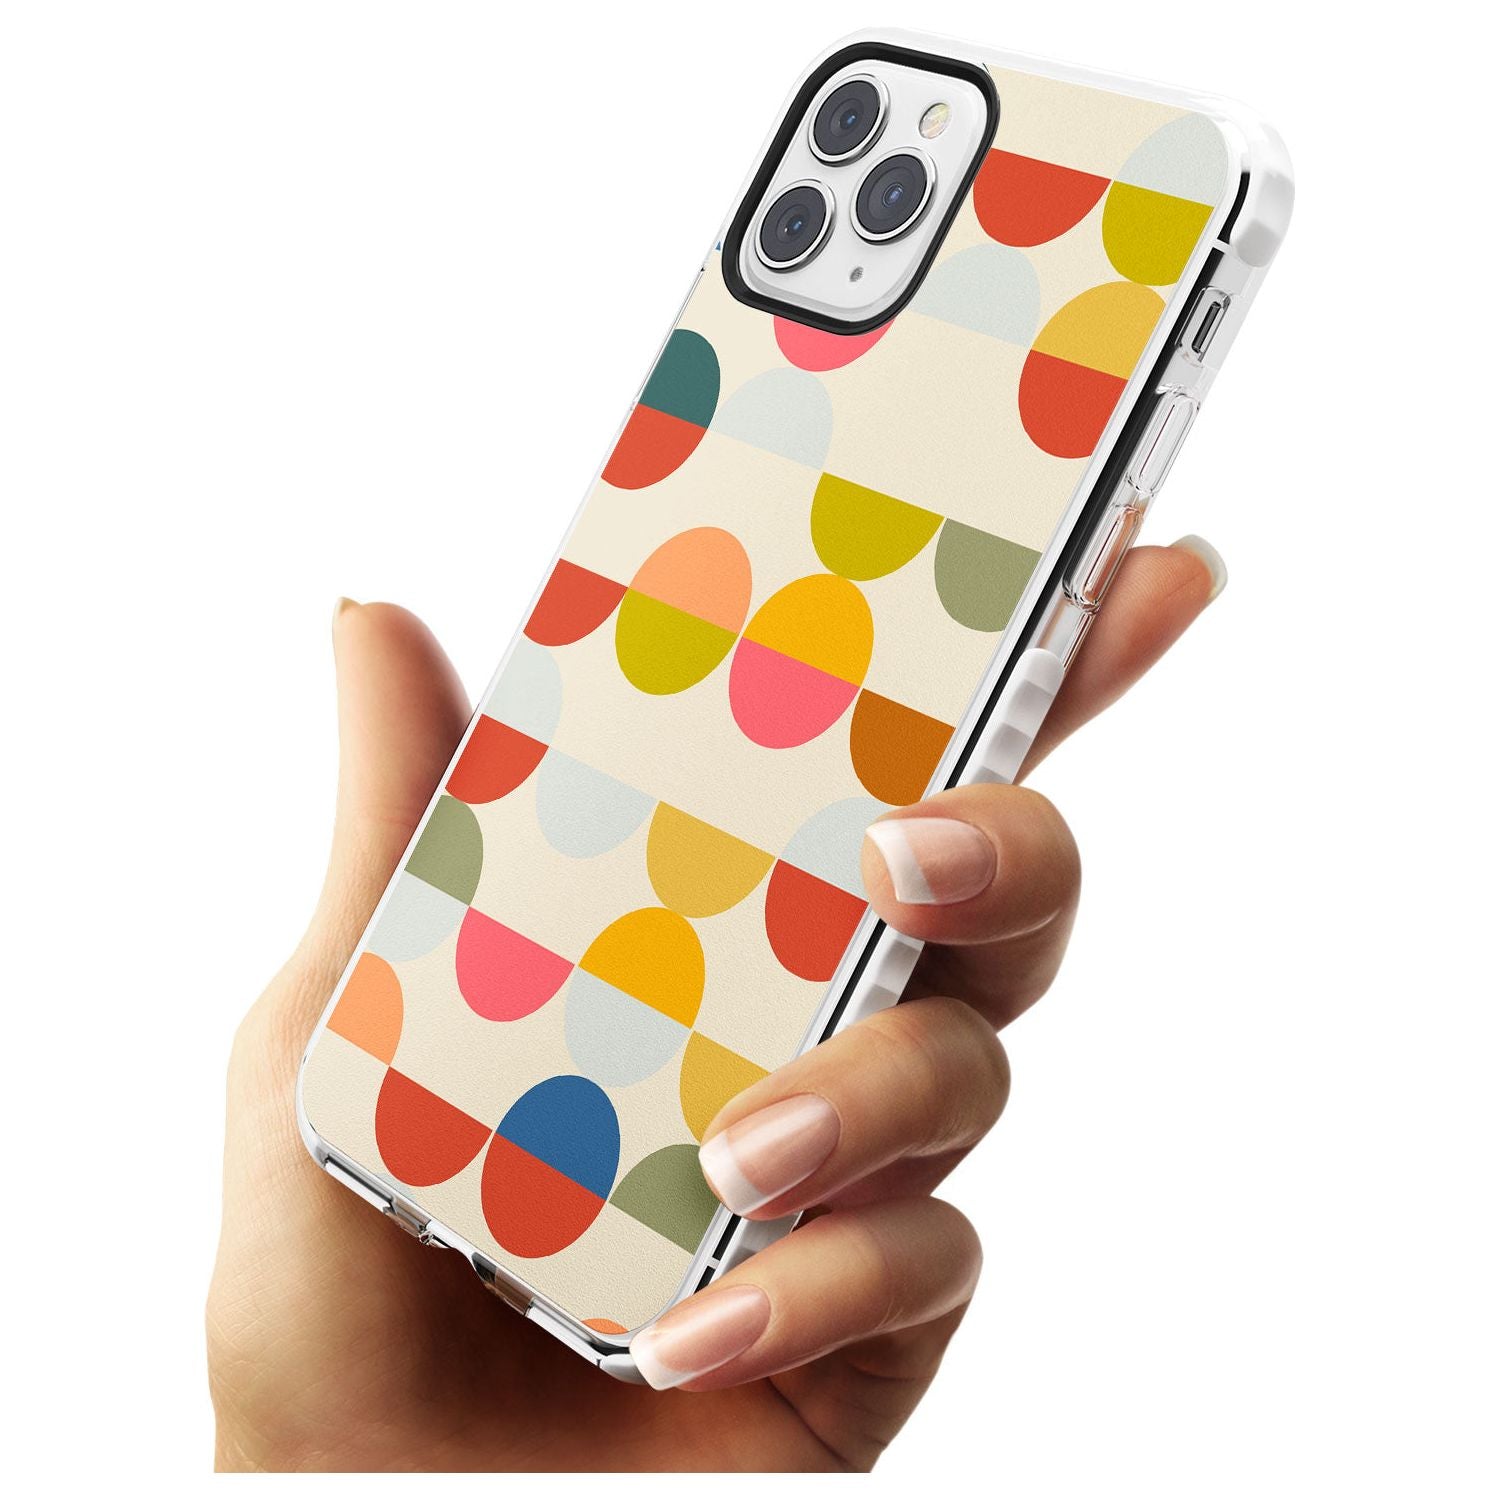 Abstract Retro Shapes: Colourful Circles Slim TPU Phone Case for iPhone 11 Pro Max